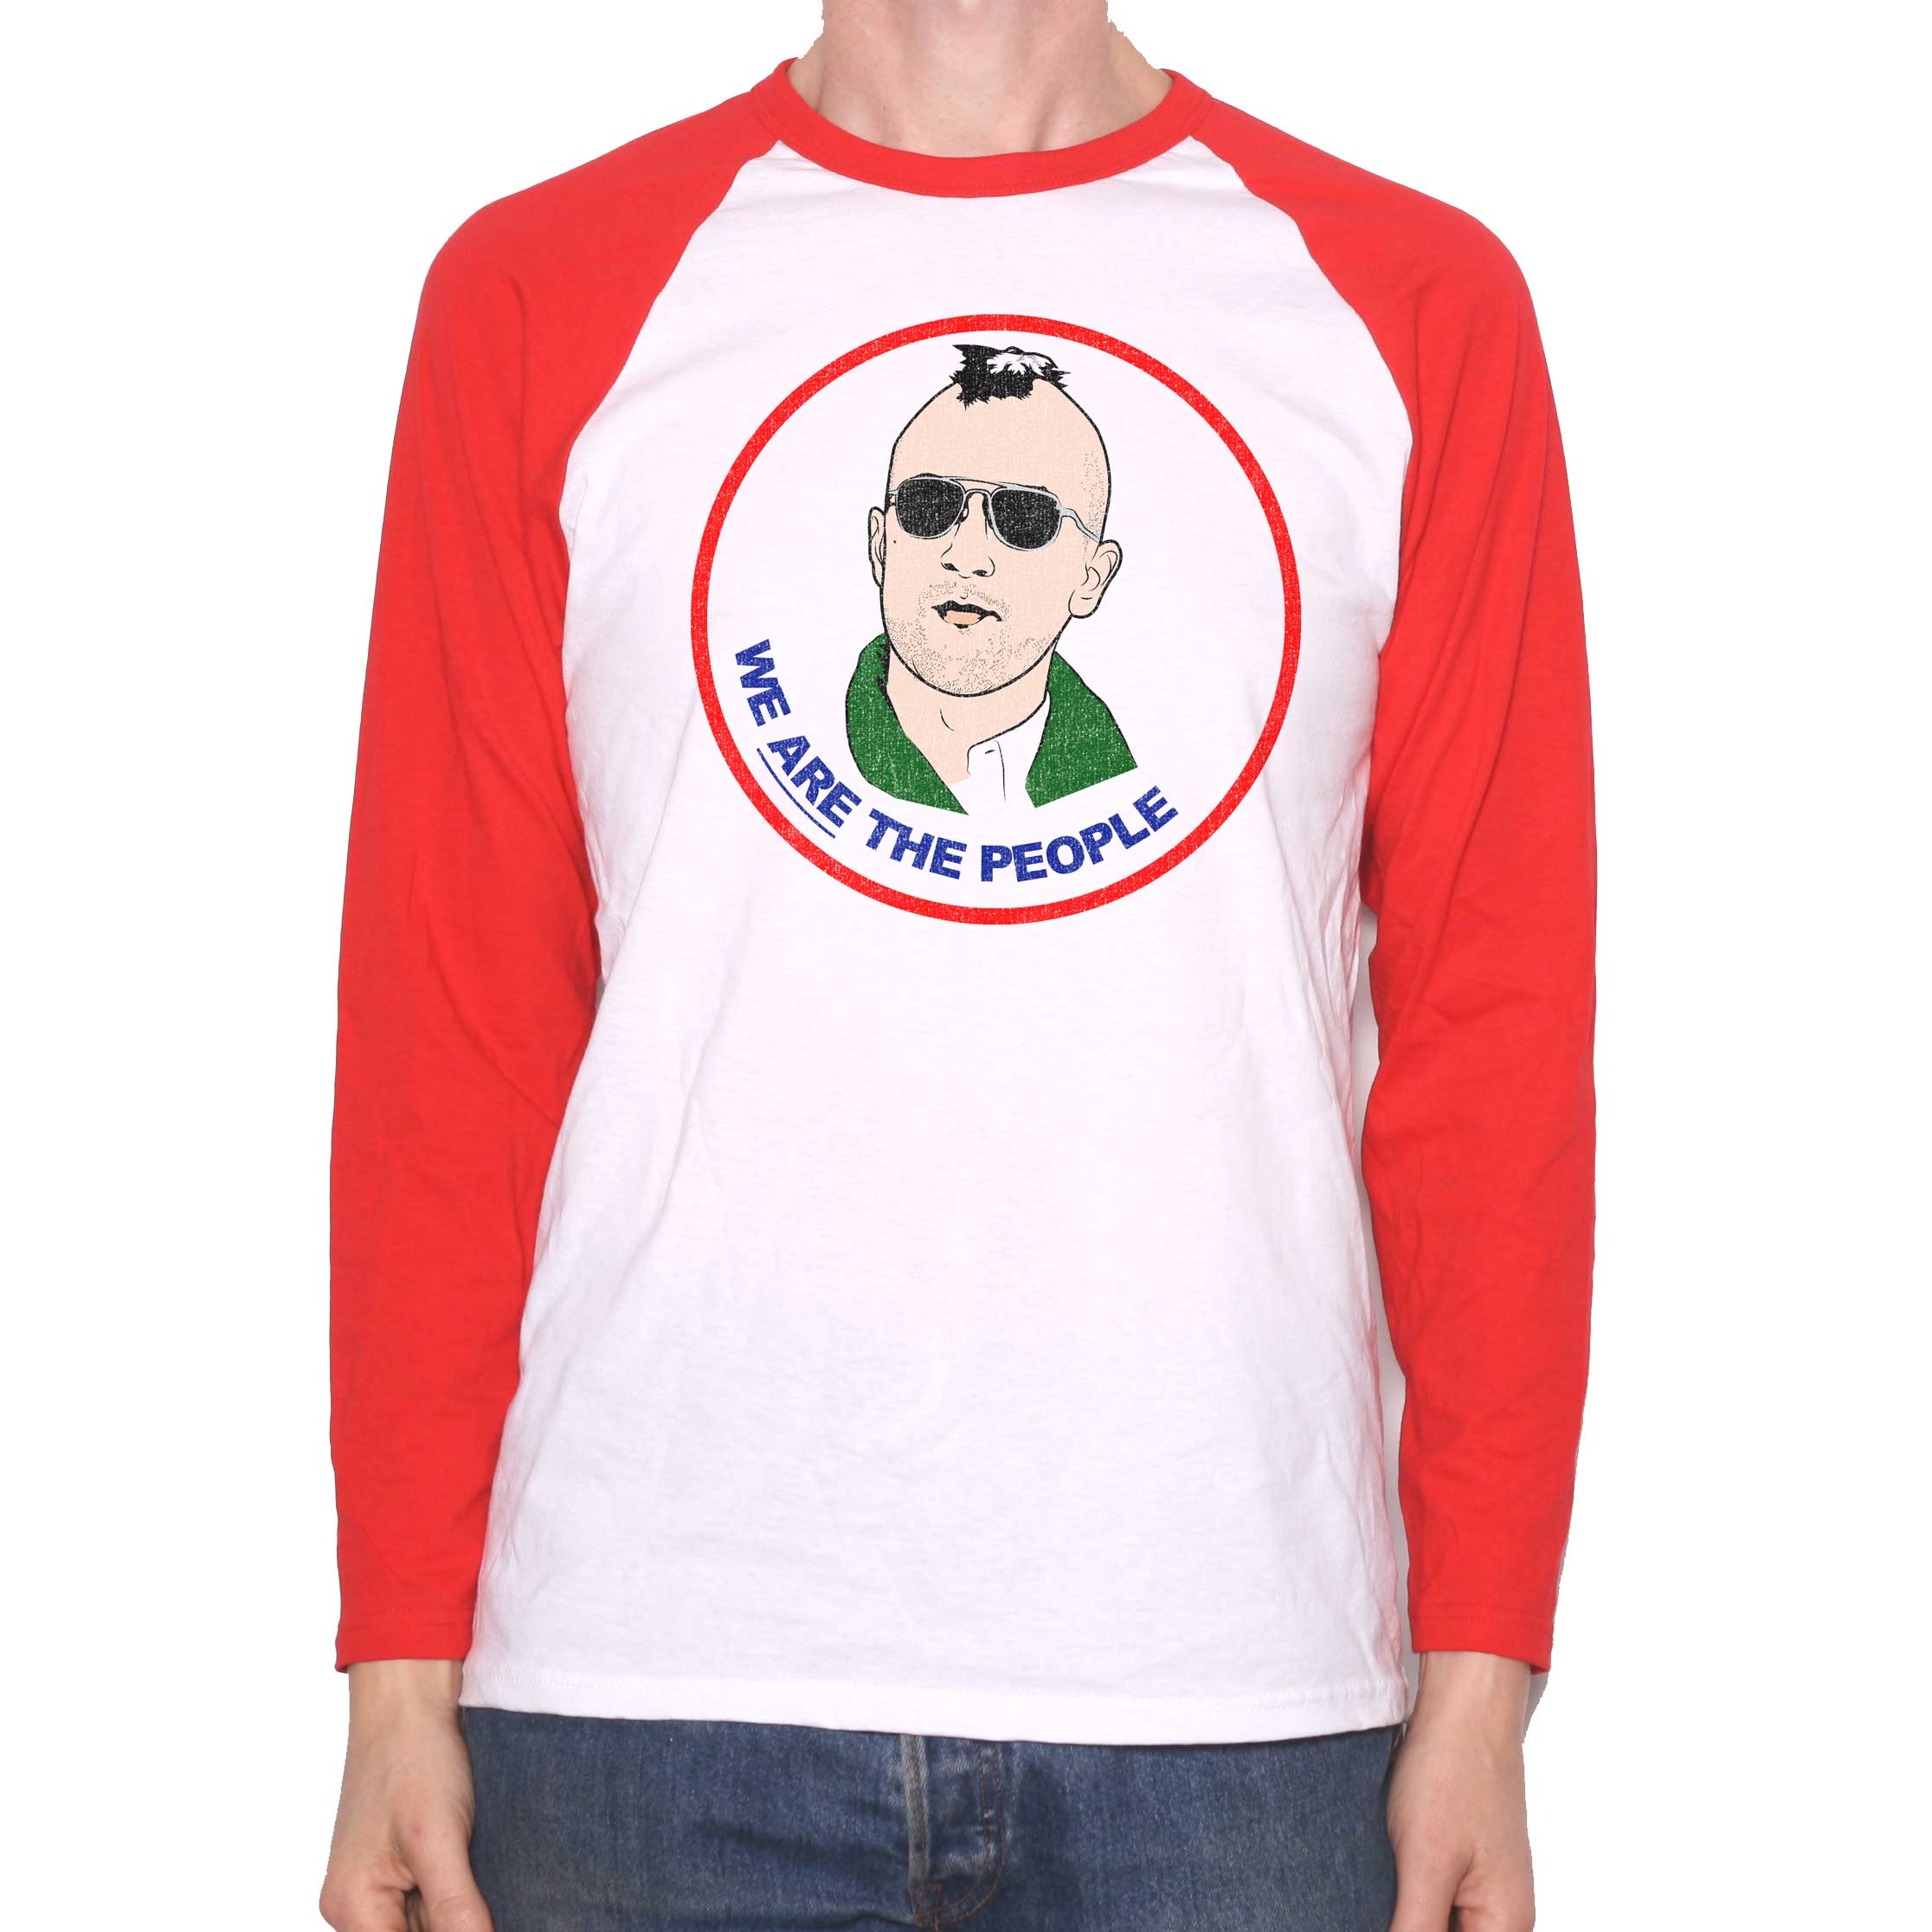 We Are The People Travis Bickle Illustration T Shirt